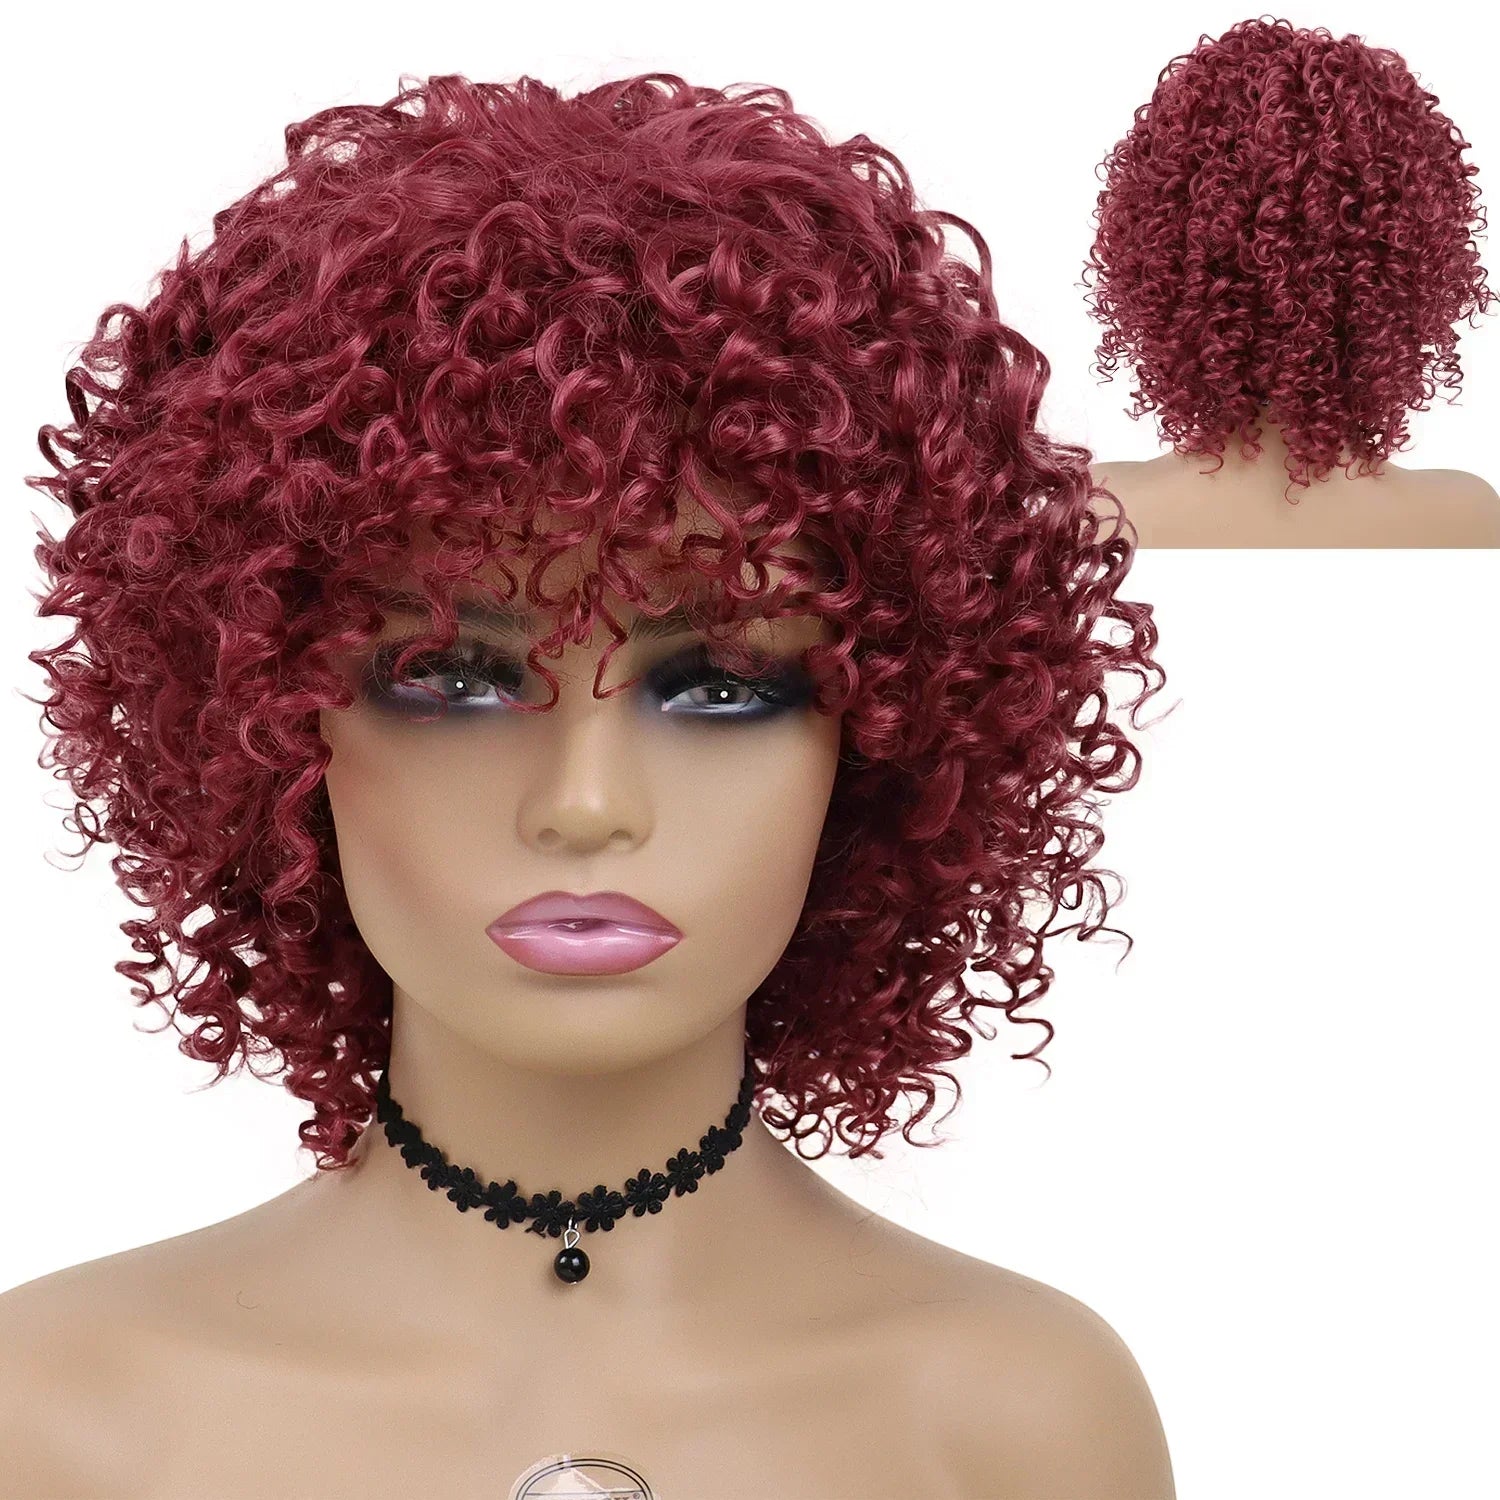 Synthetic Curly Wigs for Women Short Afro Wig Natural Female Mix Brown Hair African American Wig for Ladies Bob Curls - Flexi Africa - Flexi Africa offers Free Delivery Worldwide - Vibrant African traditional clothing showcasing bold prints and intricate designs